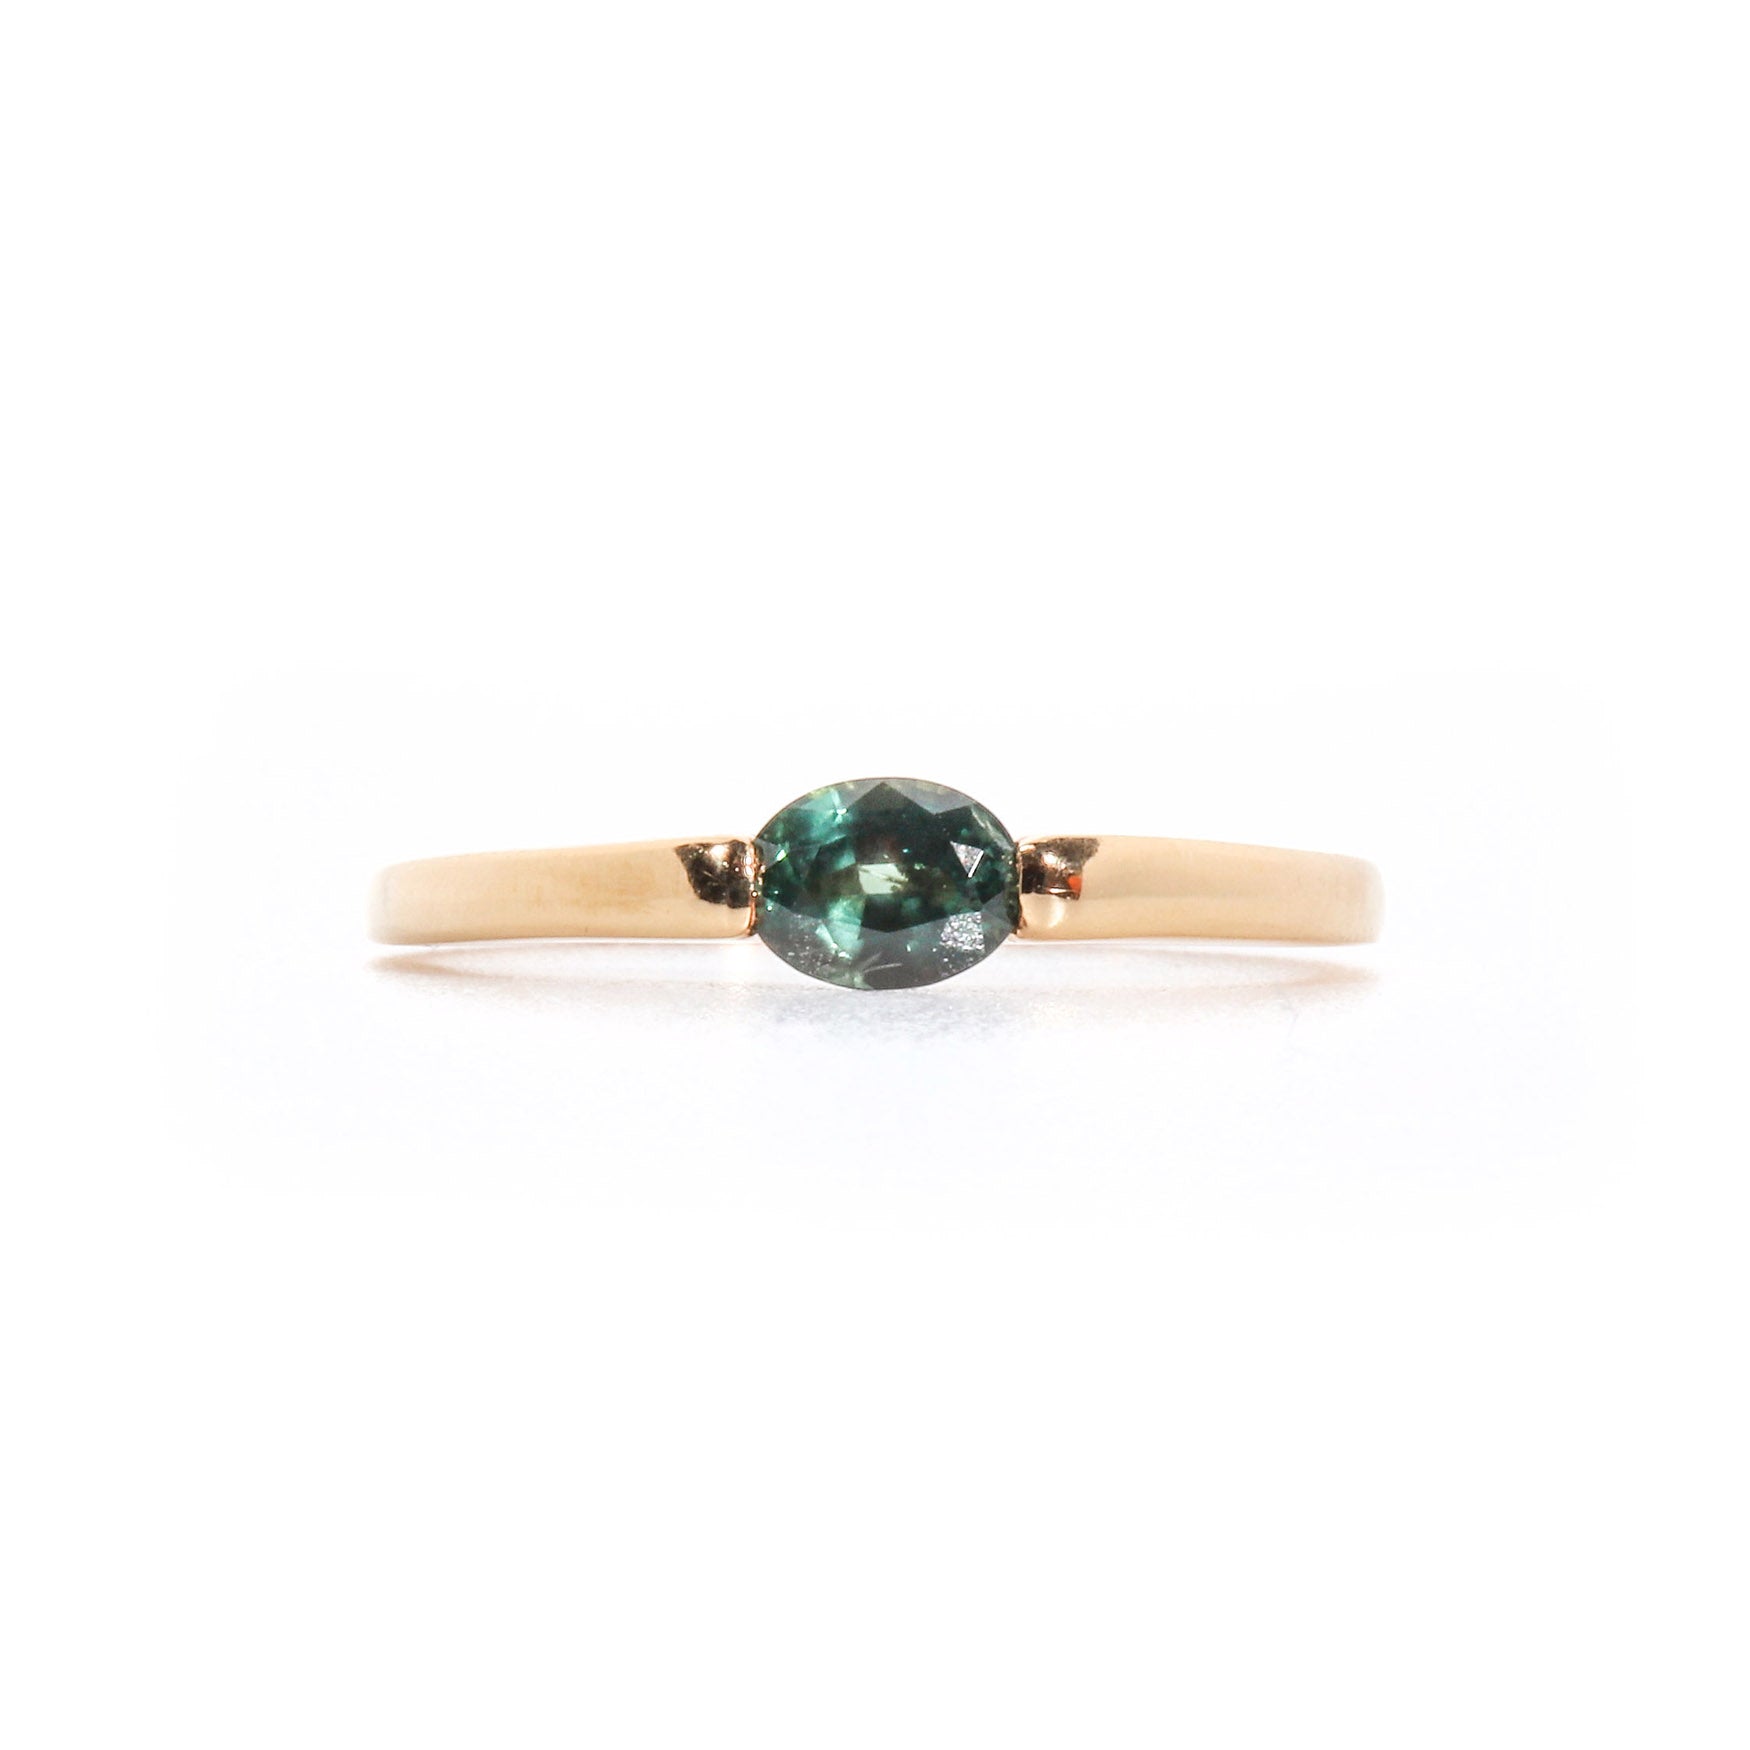 Ring with Oval Teal Sapphire (0.59 ct) in Tension Setting and Tapered Band, Solid 14k Gold | ONE-OF-A-KIND